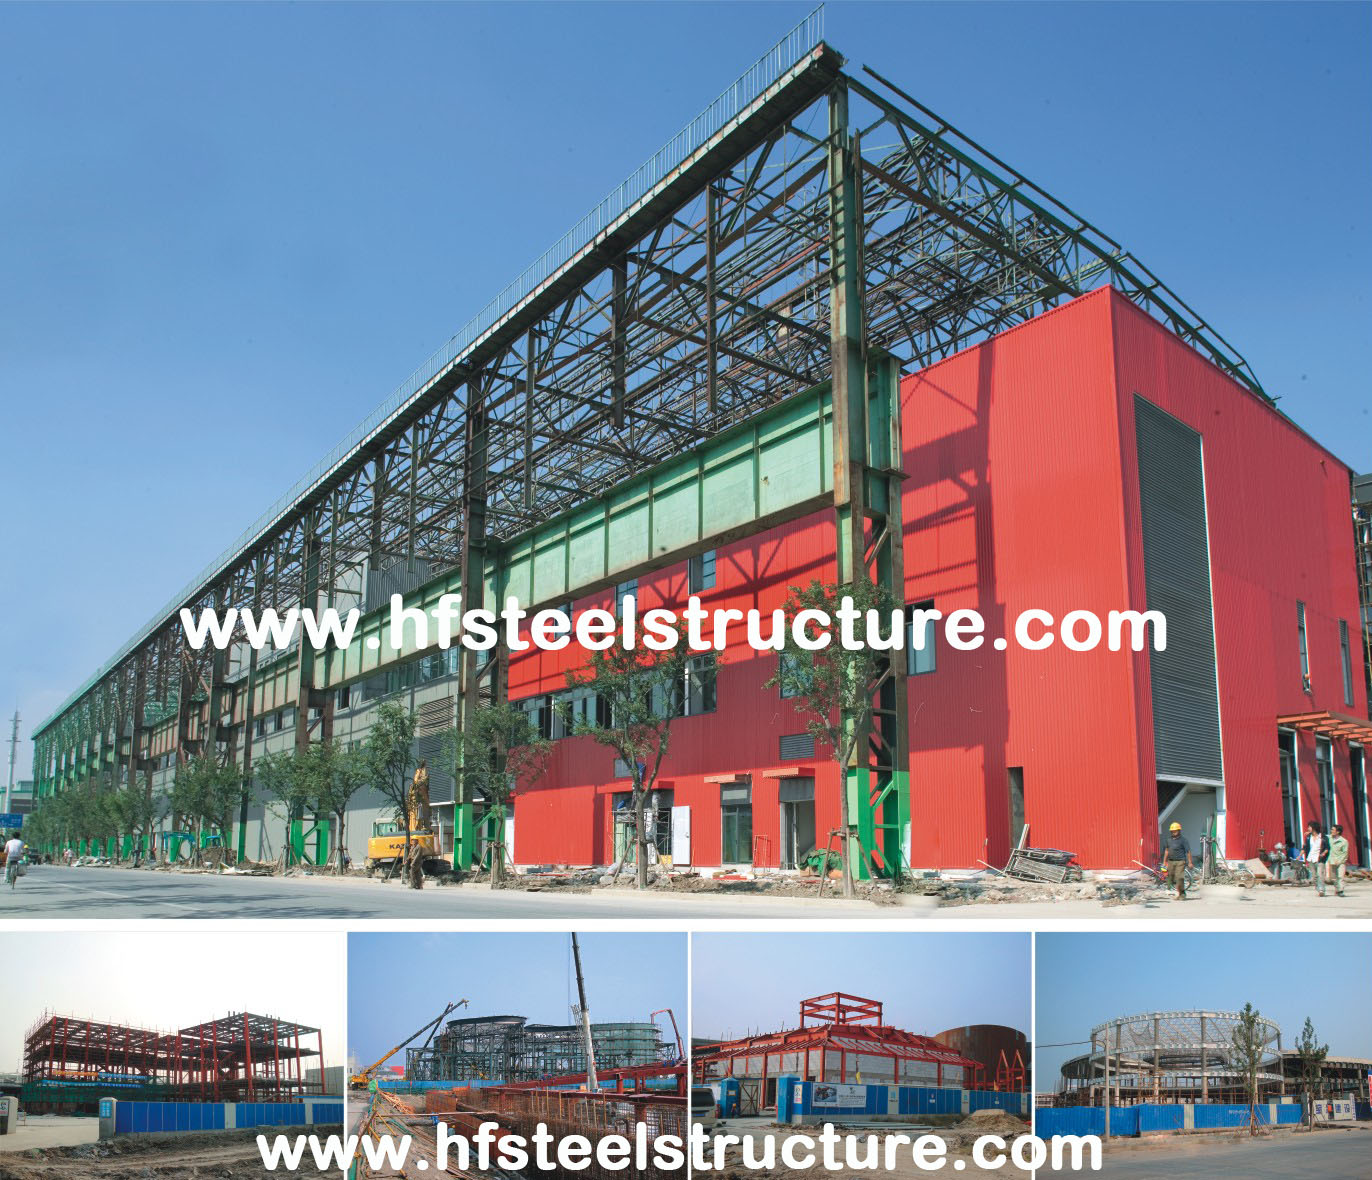 Contractor Fabricator Producing Frame Commercial Steel Buildings ASD Design Standards